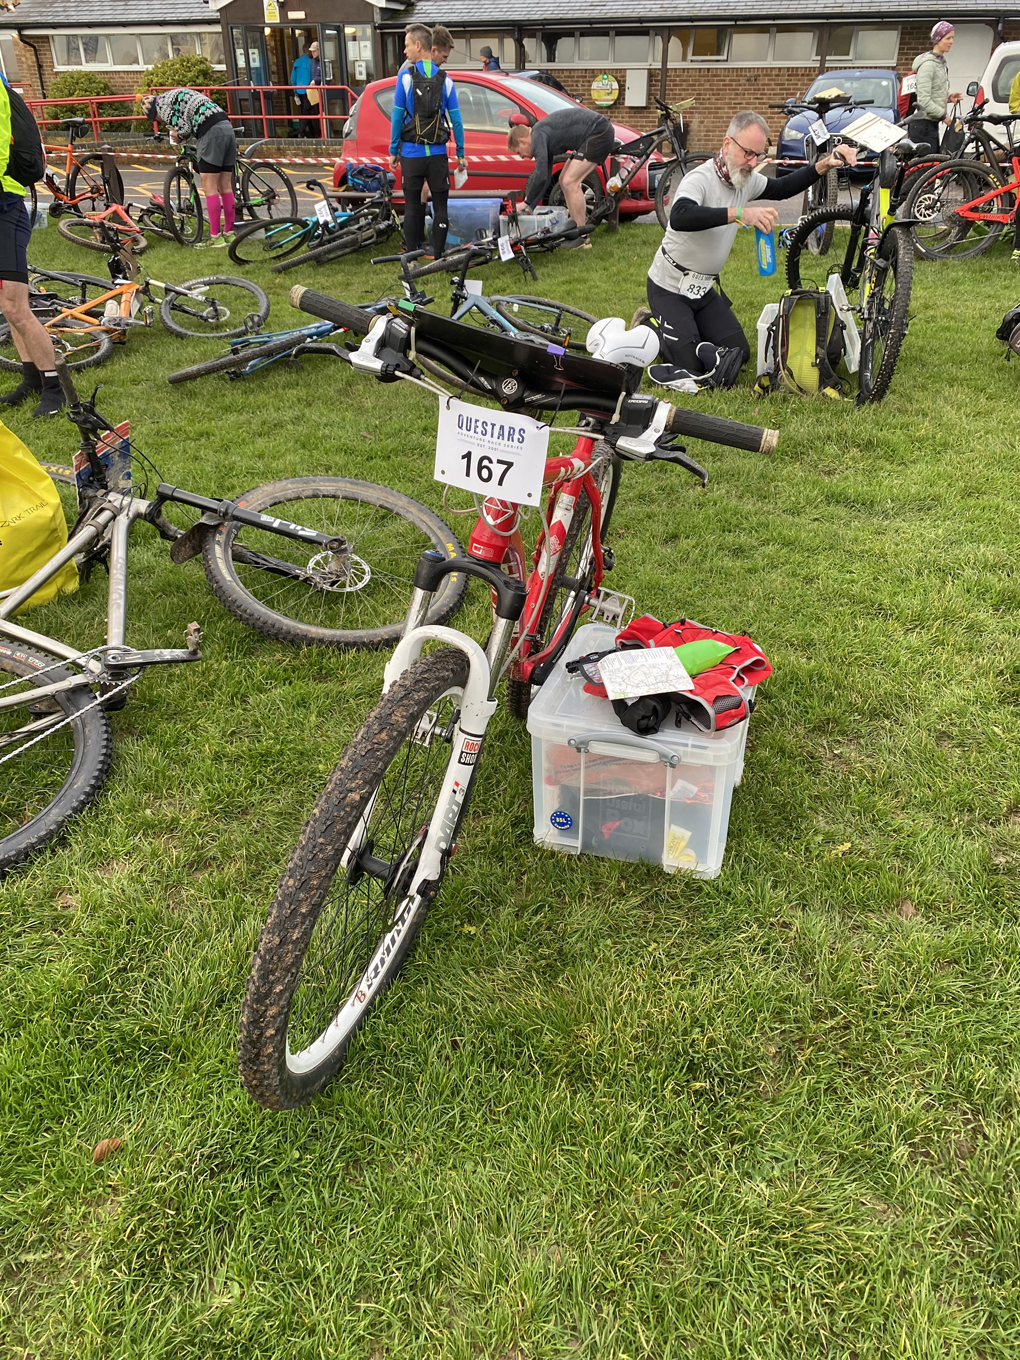 A mountain bike with a map board and attached race number (167) propped up against a box, in a field with other bikes.